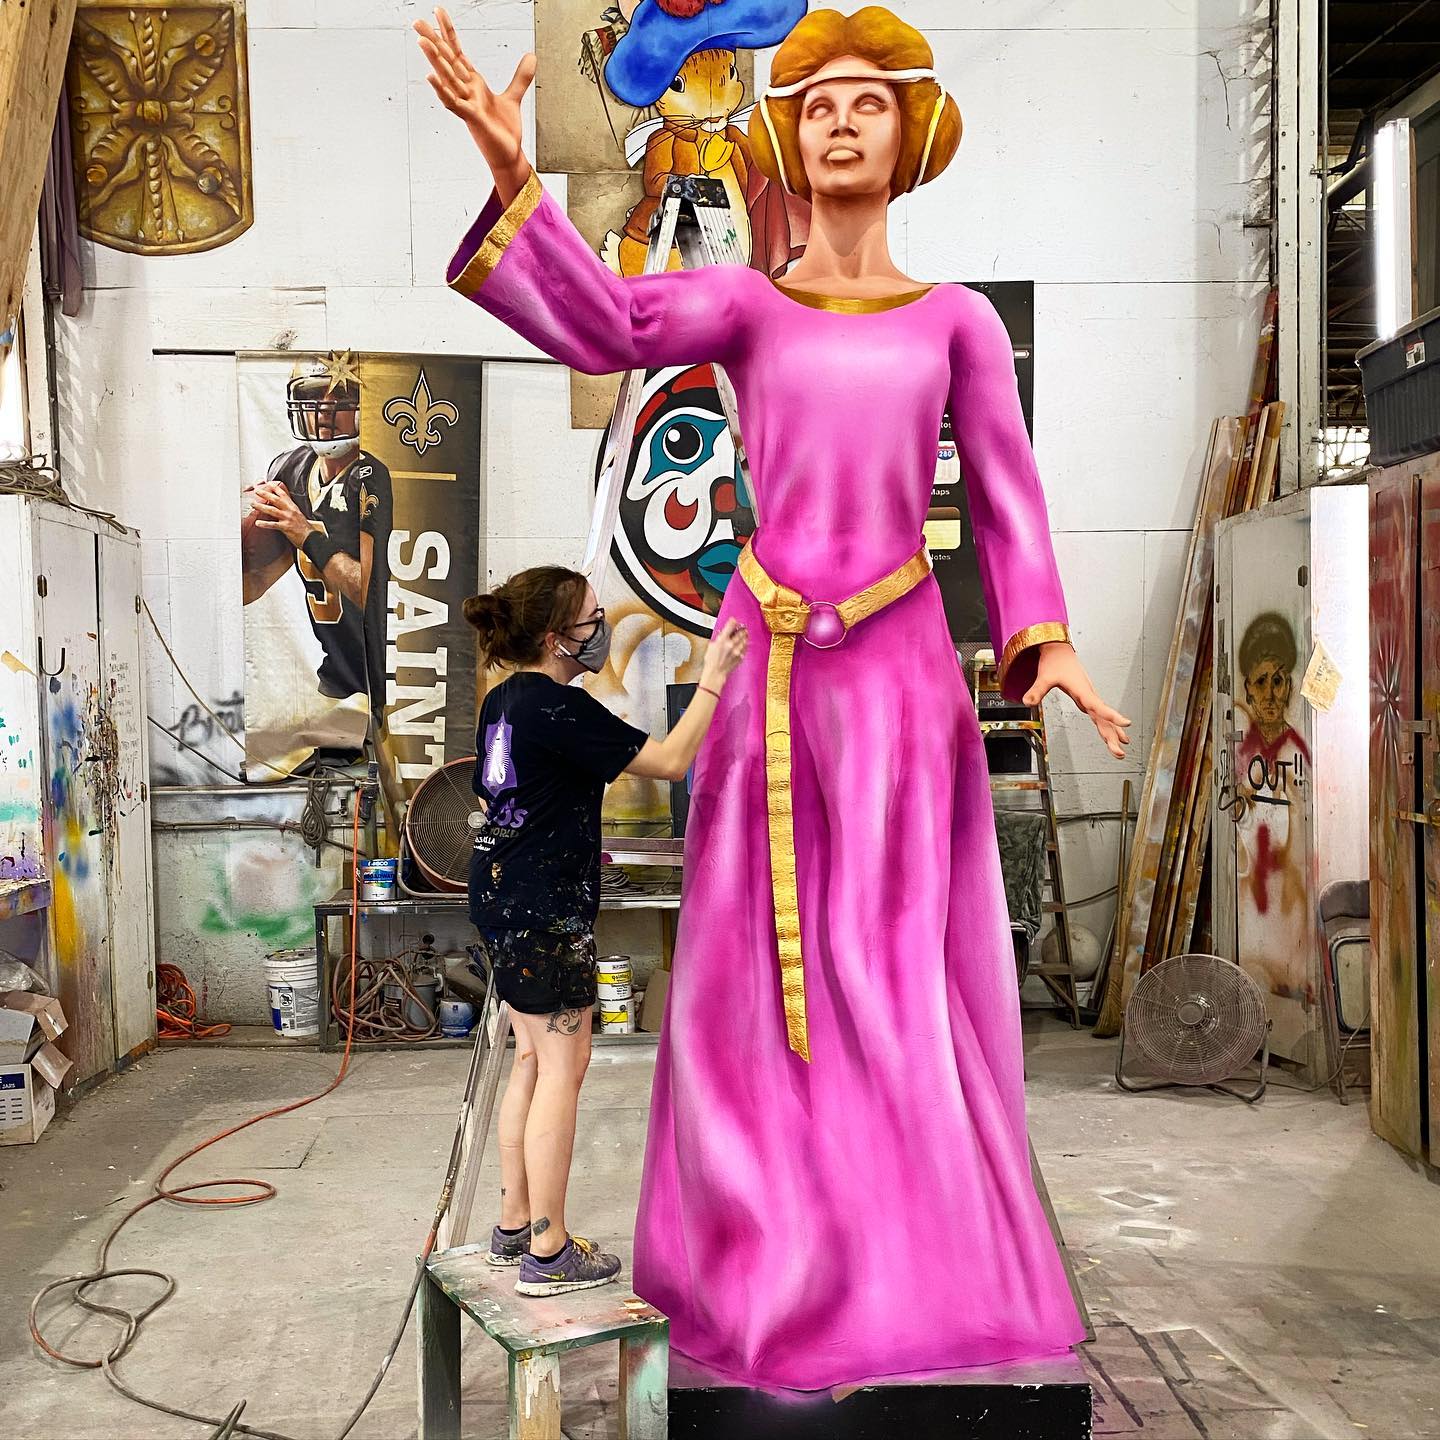 mardi gras world things to do in New Orleans